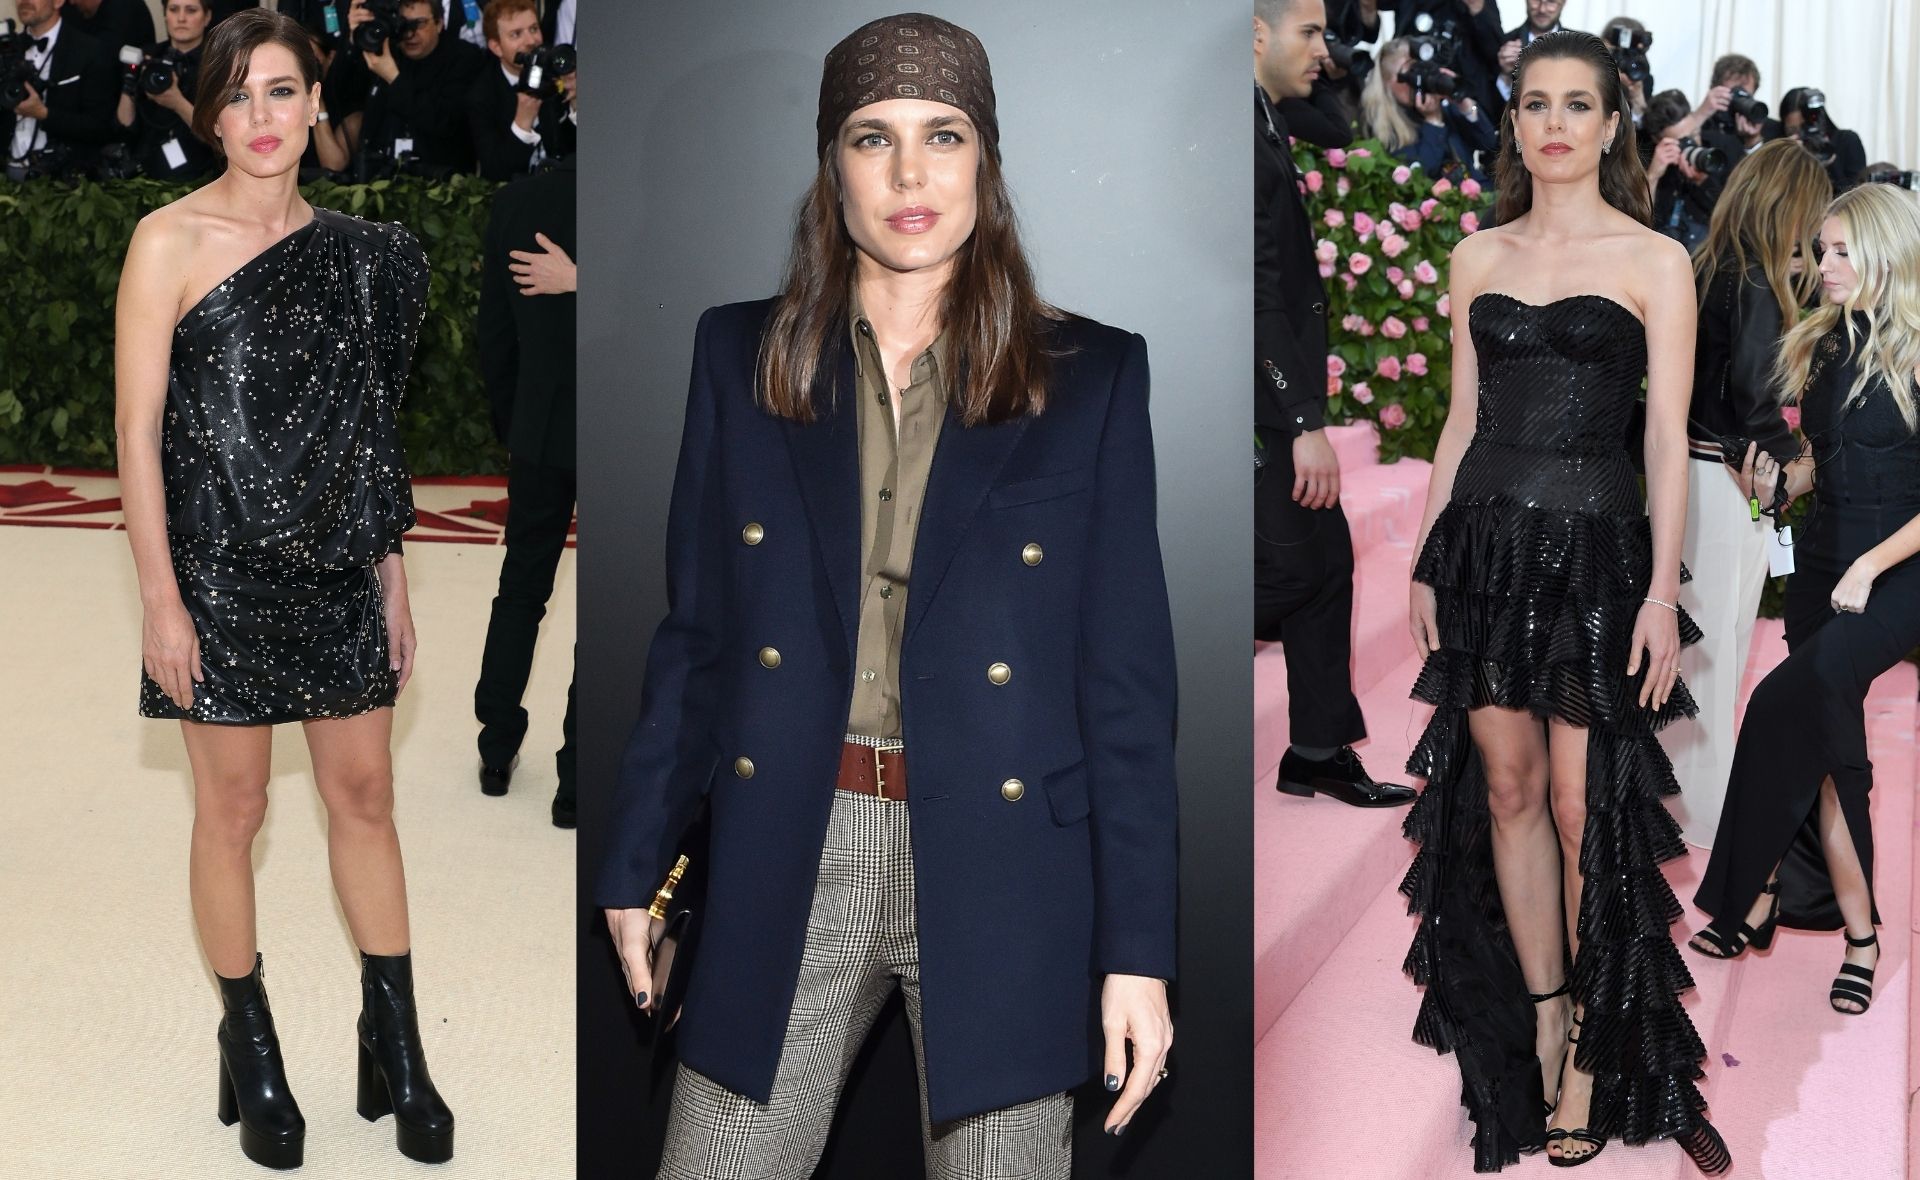 Monaco royal Charlotte Casiraghi’s immaculate style is her birthright, and her most polished outfits are too good to ignore